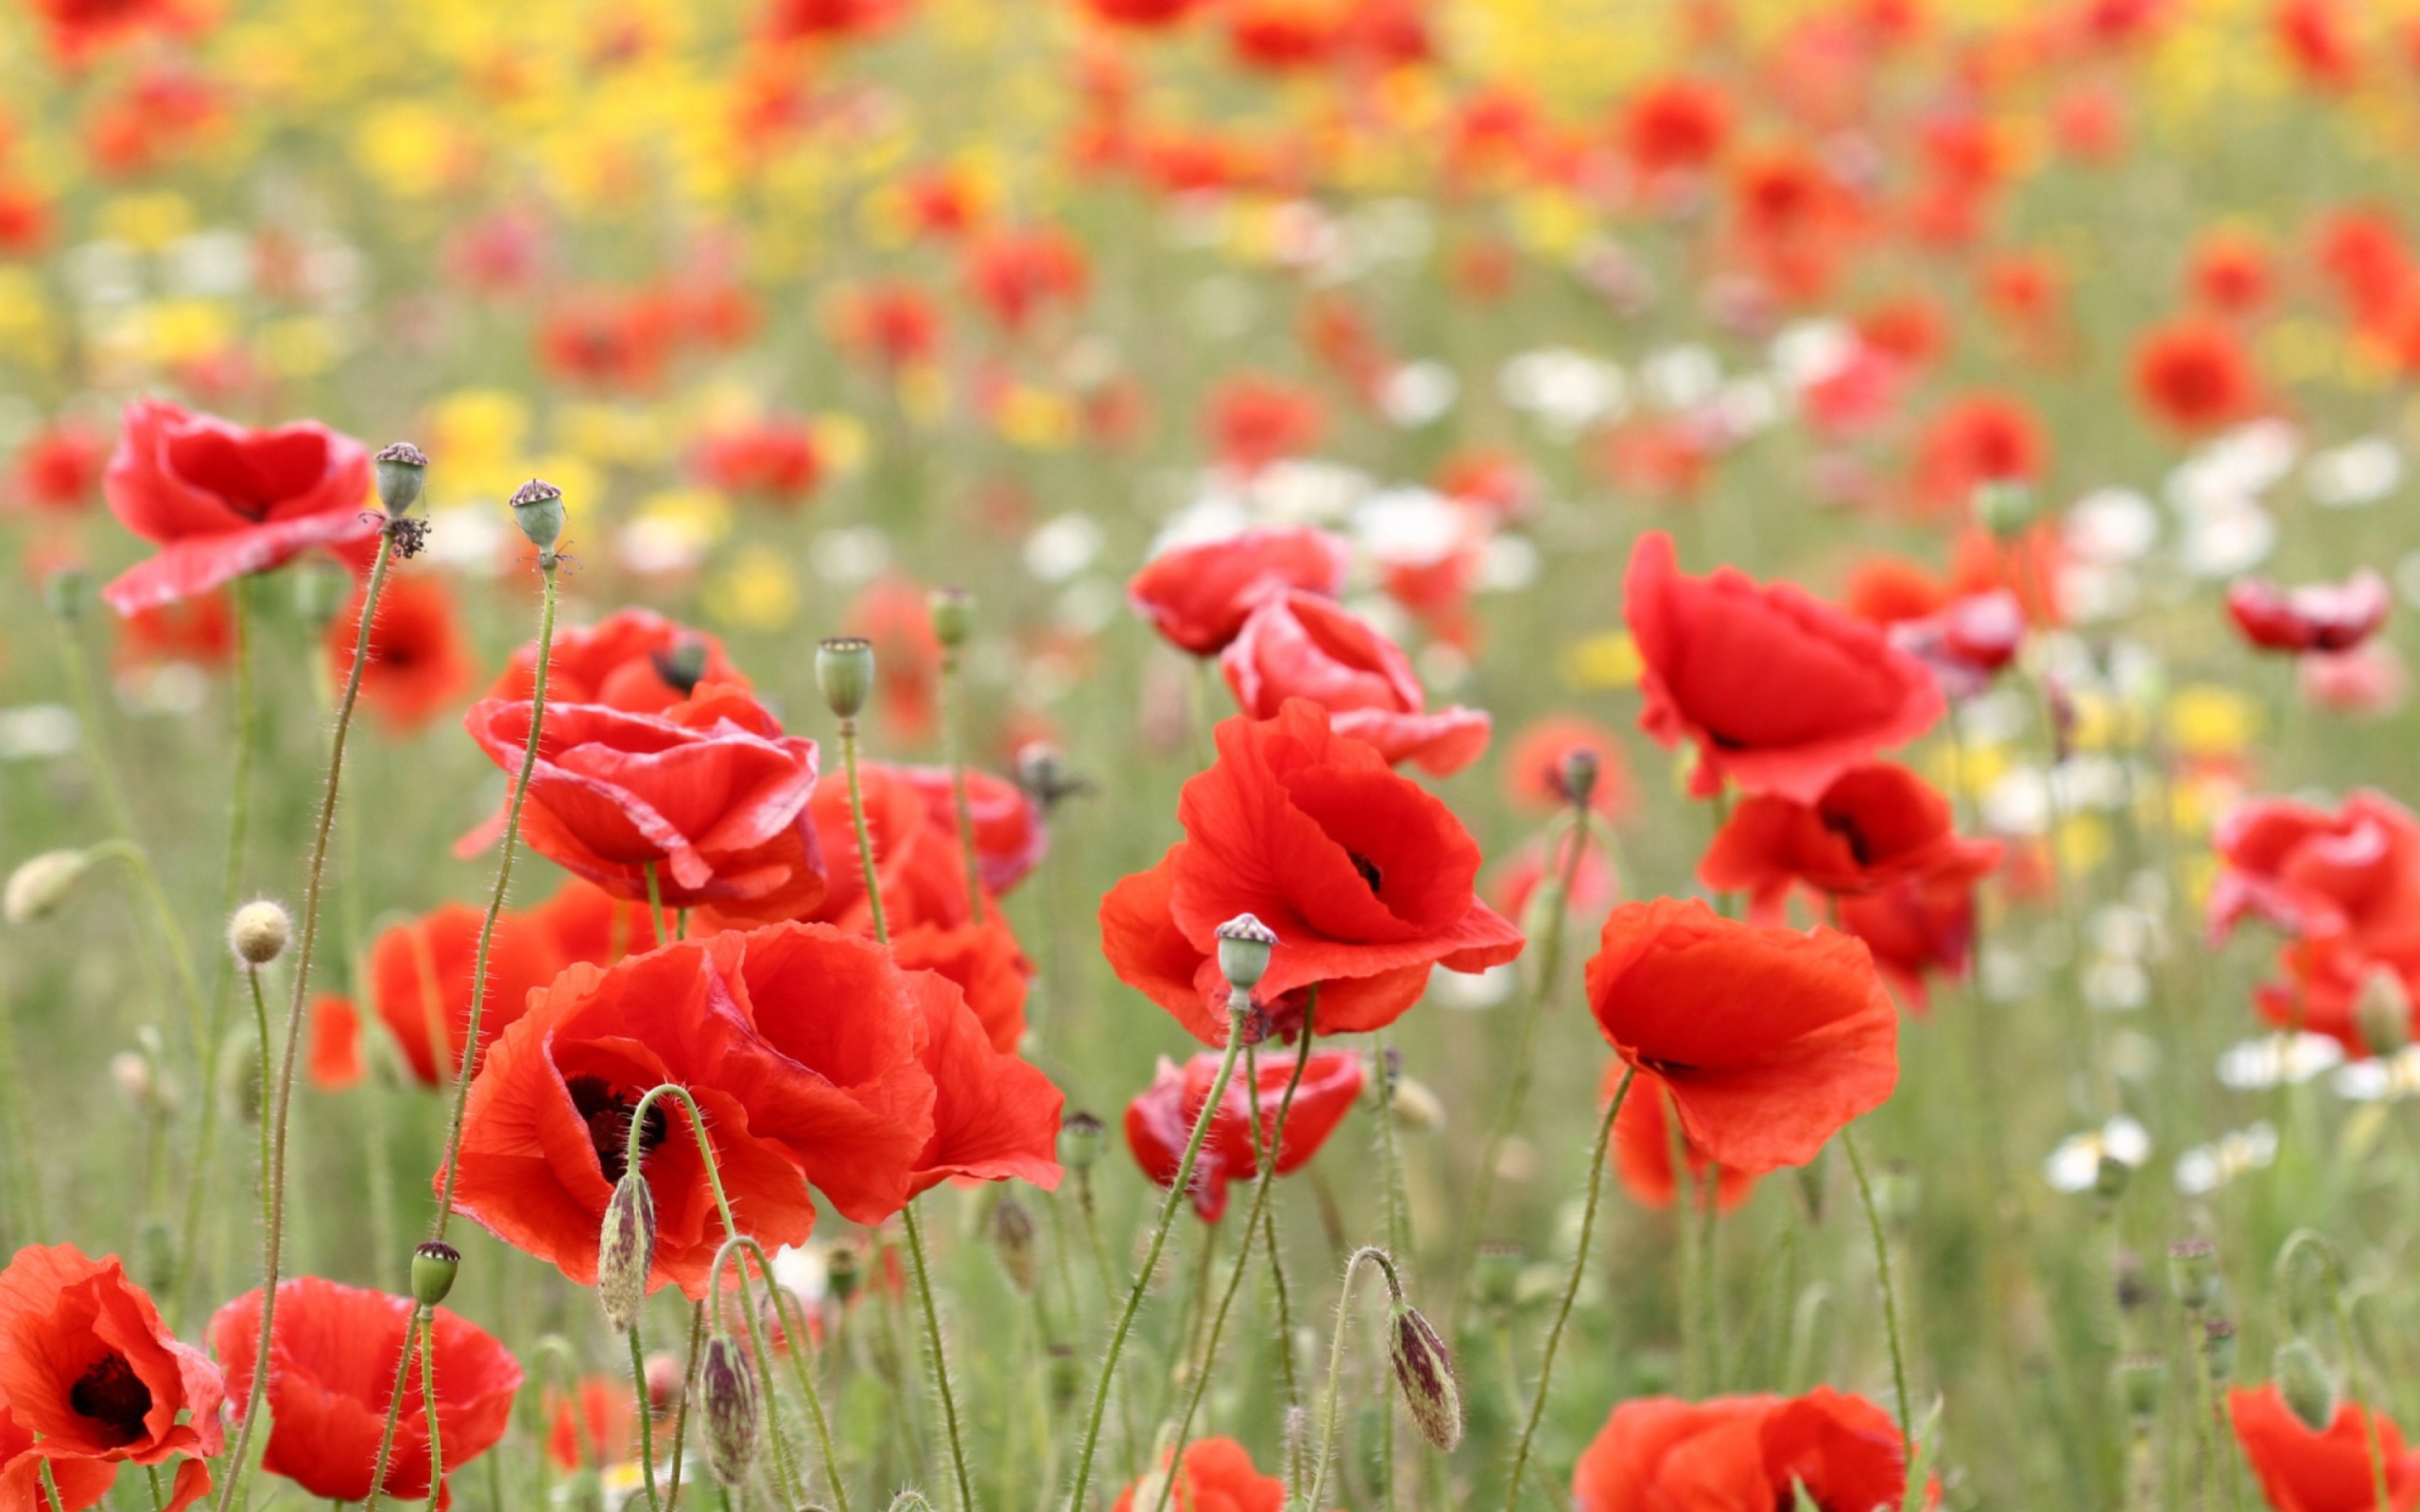 Poppies In Nature wallpaper 2560x1600